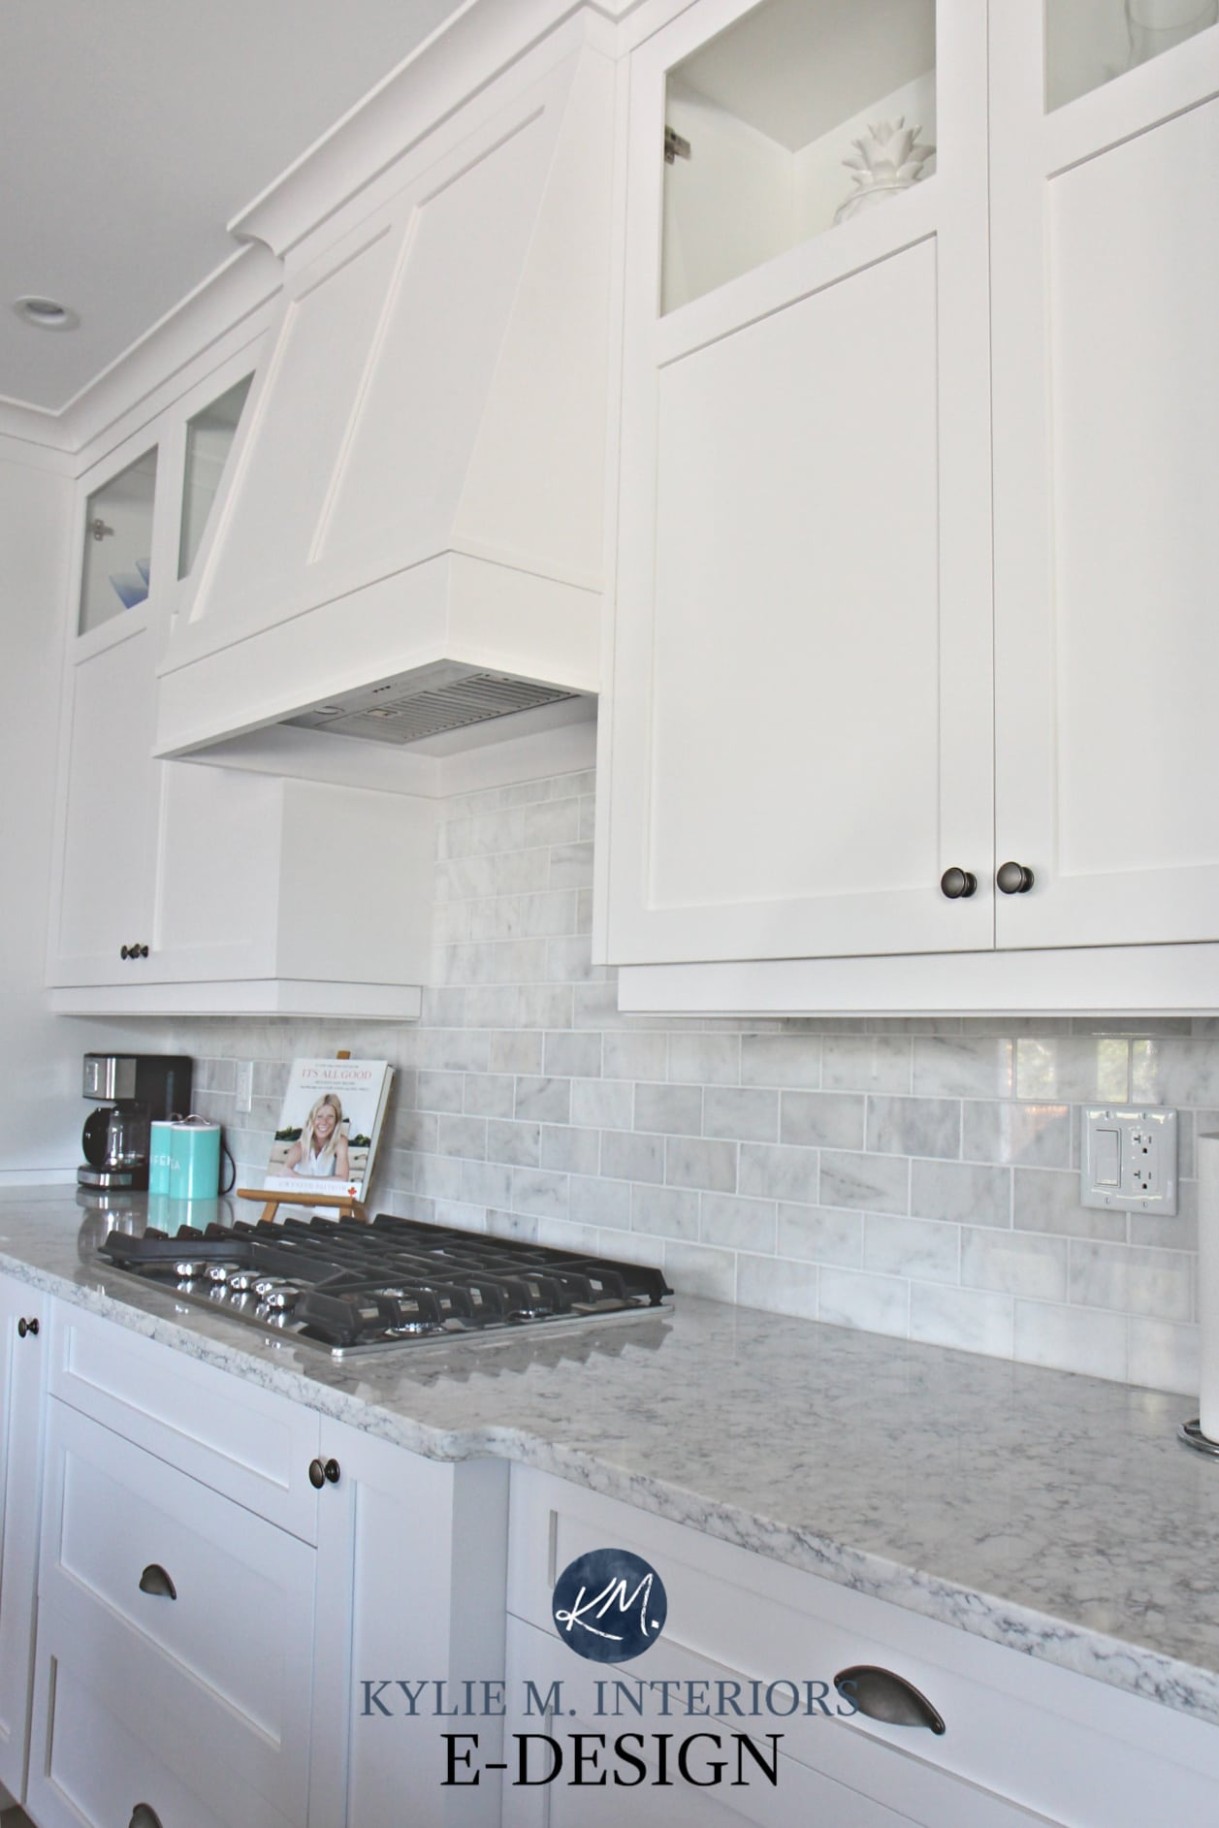 8 Questions to Ask Yourself Before Painting Your Kitchen Cabinets